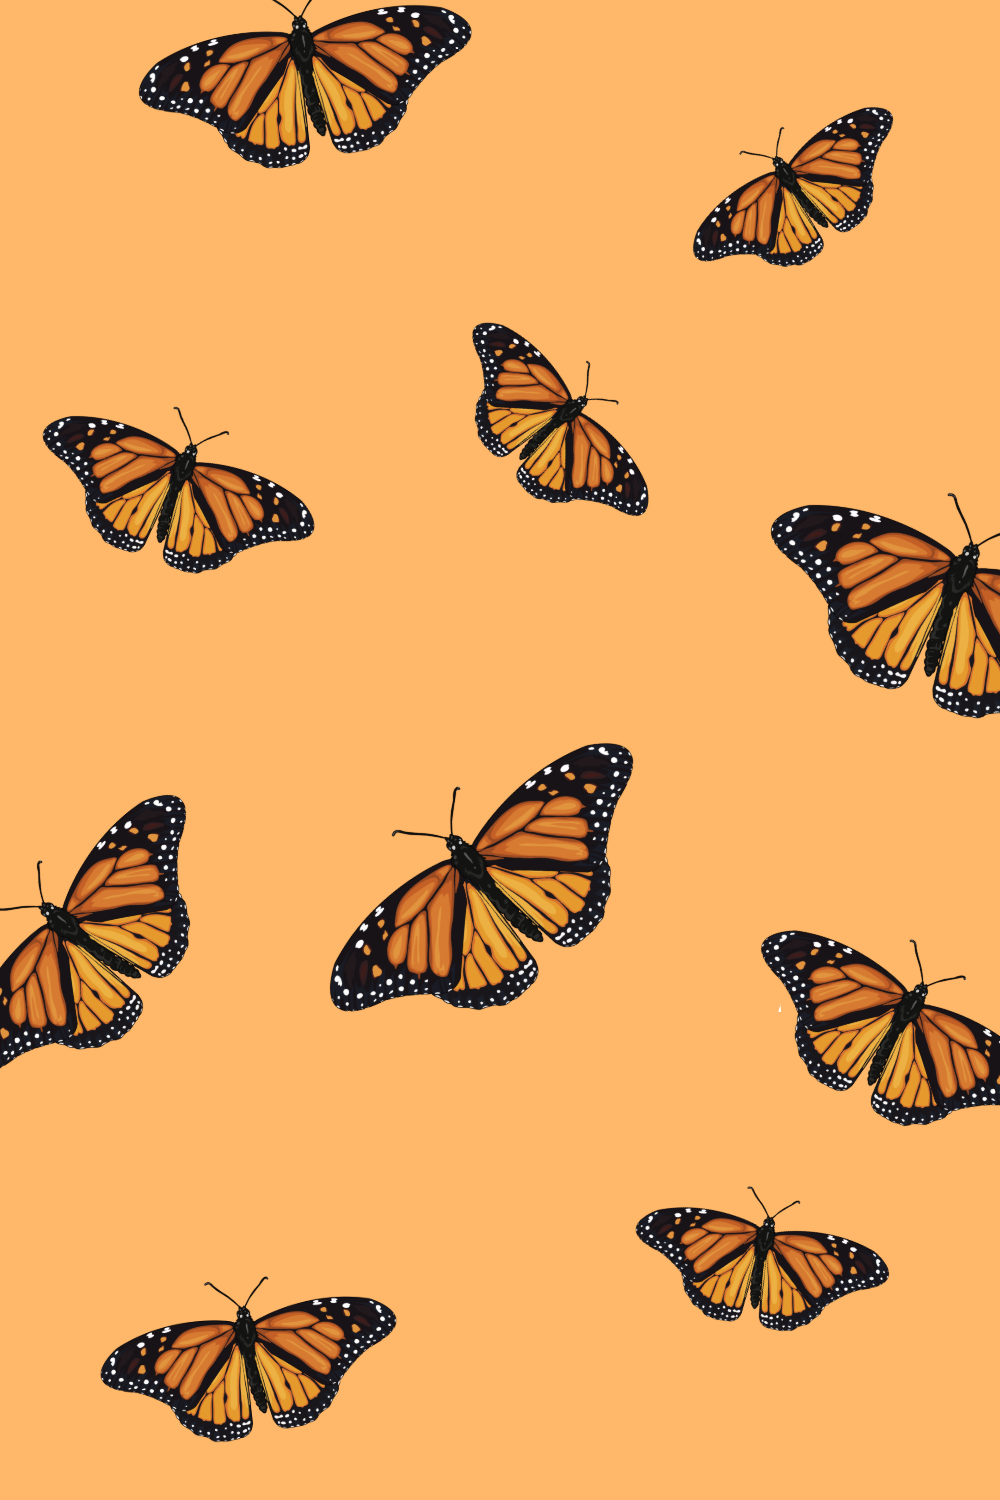 Butterfly wallpapers aesthetic wallpapers in 2020